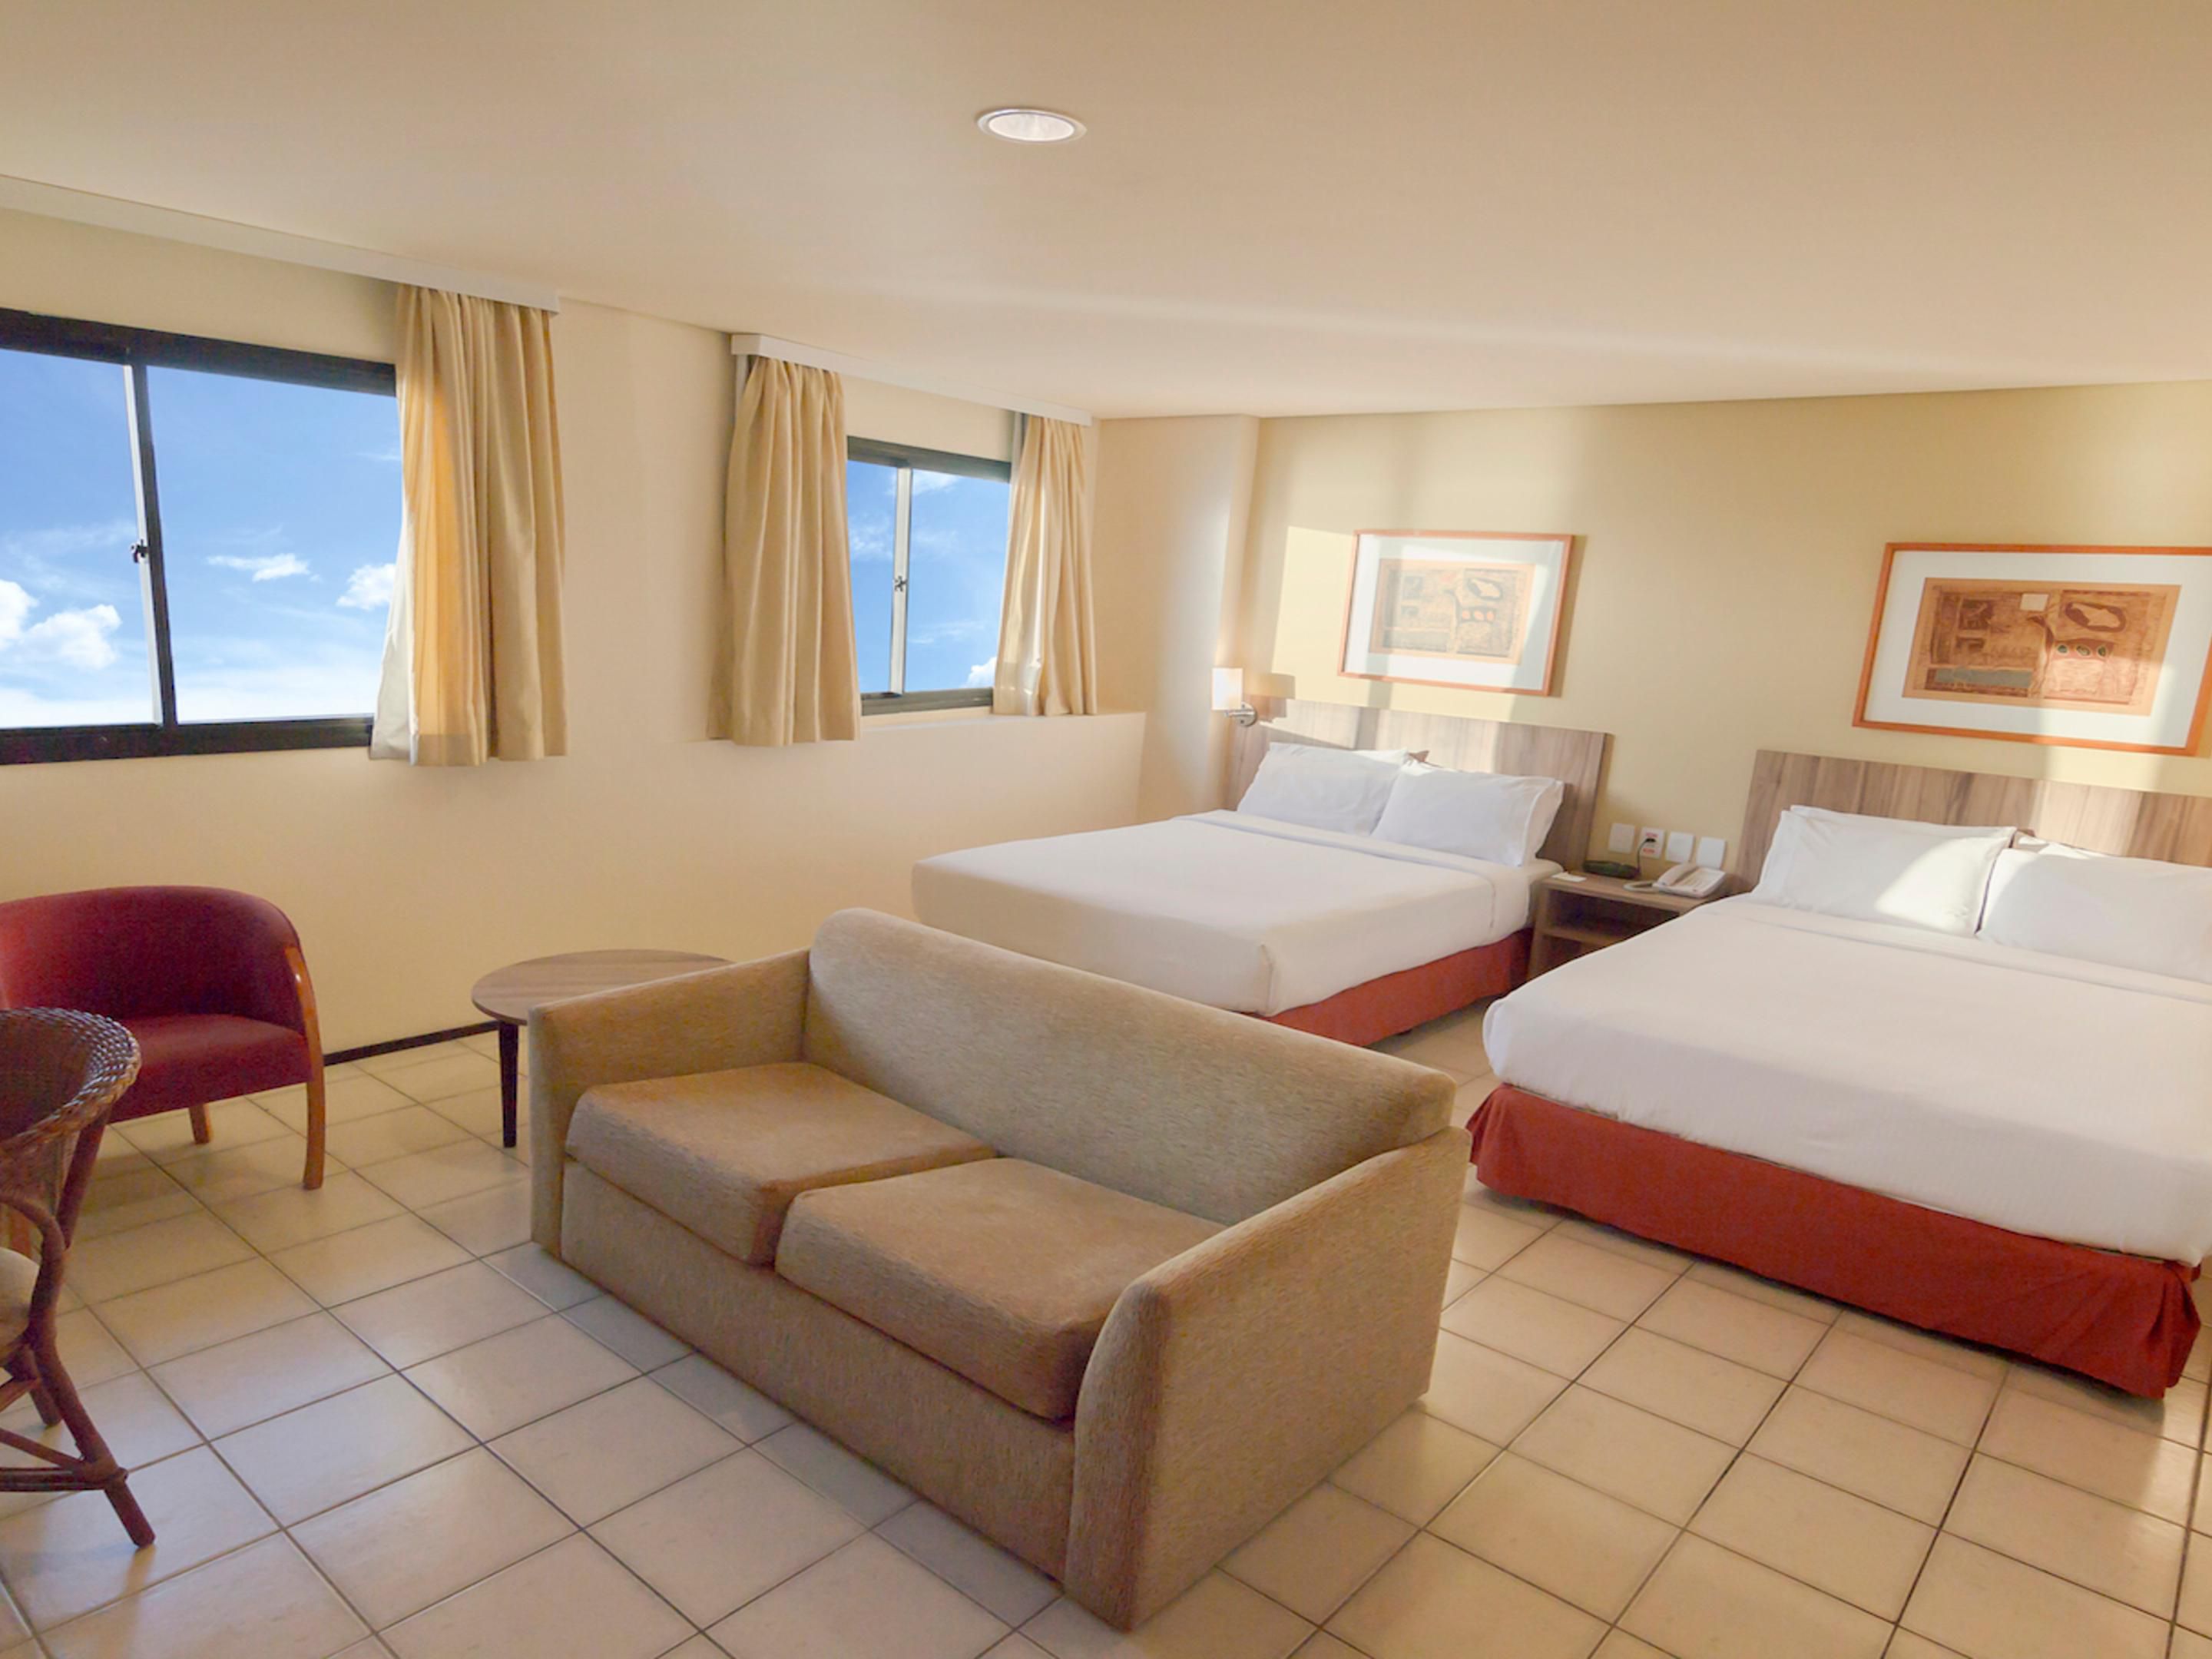 With beautiful sea view our rooms are very spacious (from 37m² to 64m²) with modern and renovated décor, perfect for your business or vacation trip.